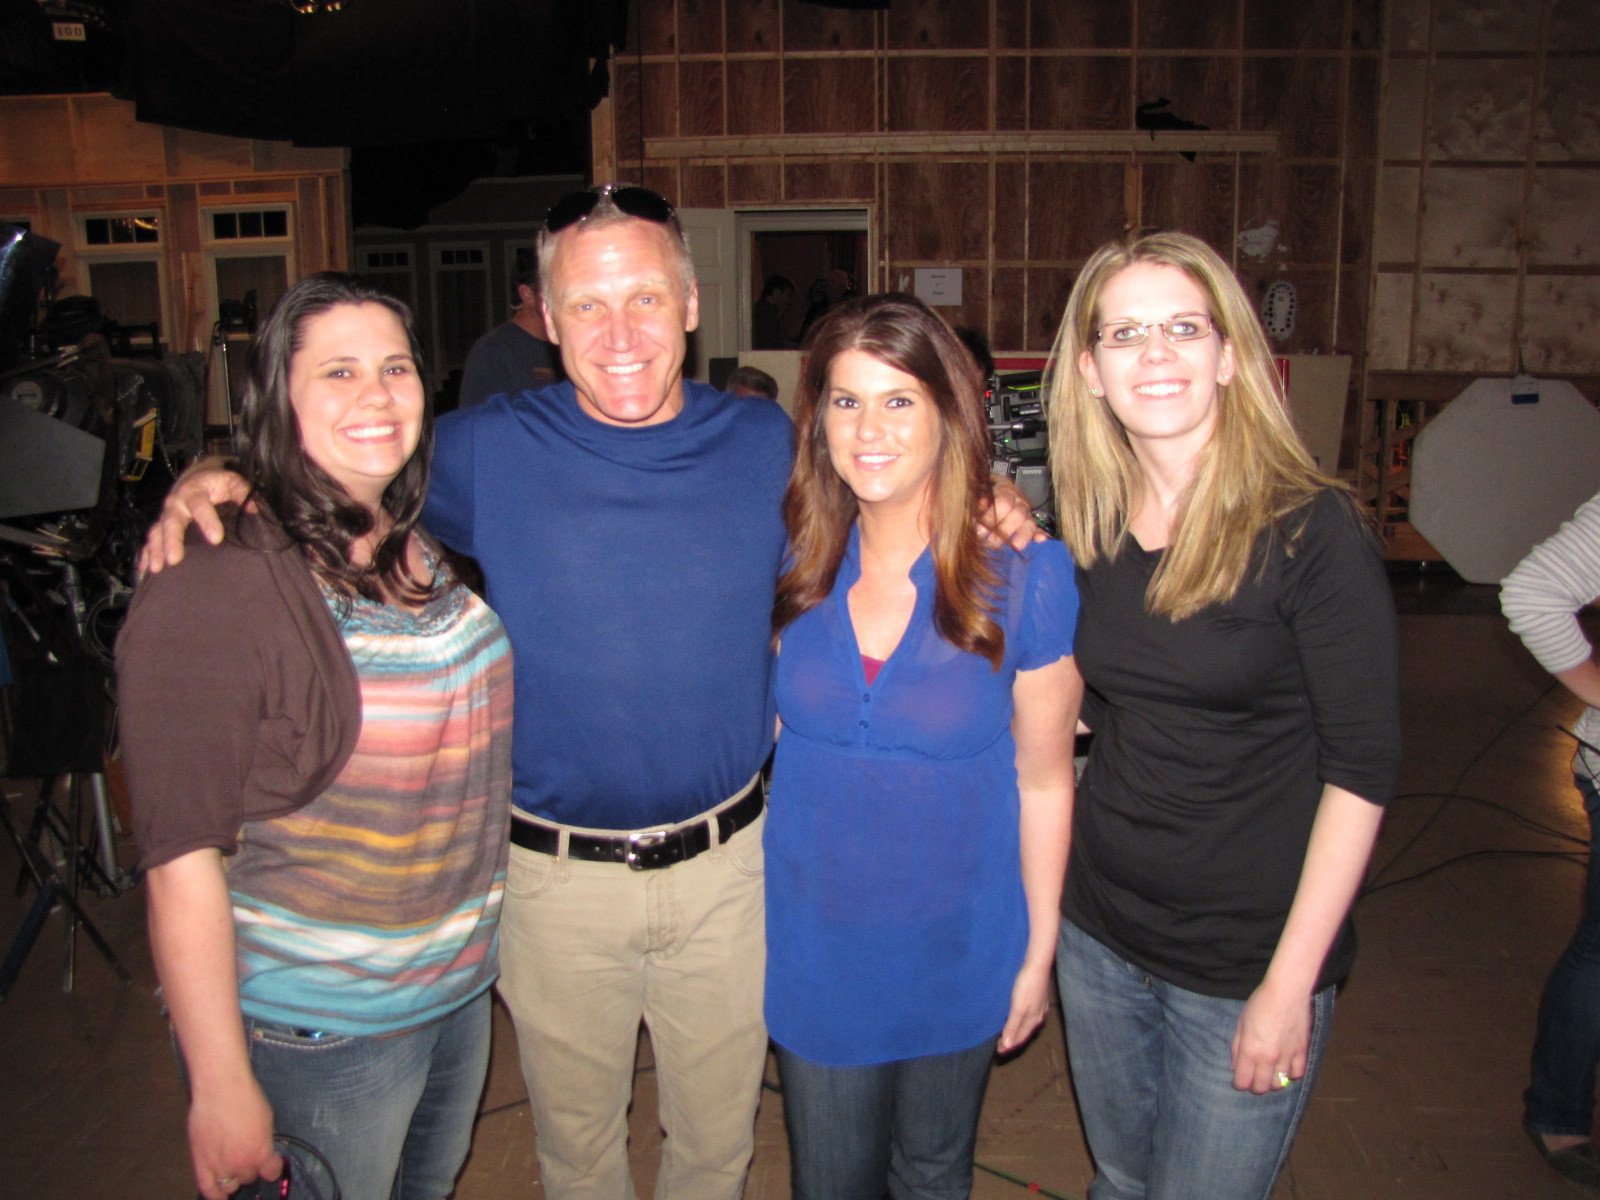  Andrea Curely, Samantha Koktan and Tammy Estes pose with Terry Serpico during a visit to "Army Wives" set in Charleston, S.C., on  February 24, 2012. | Photo: WikiMedia.